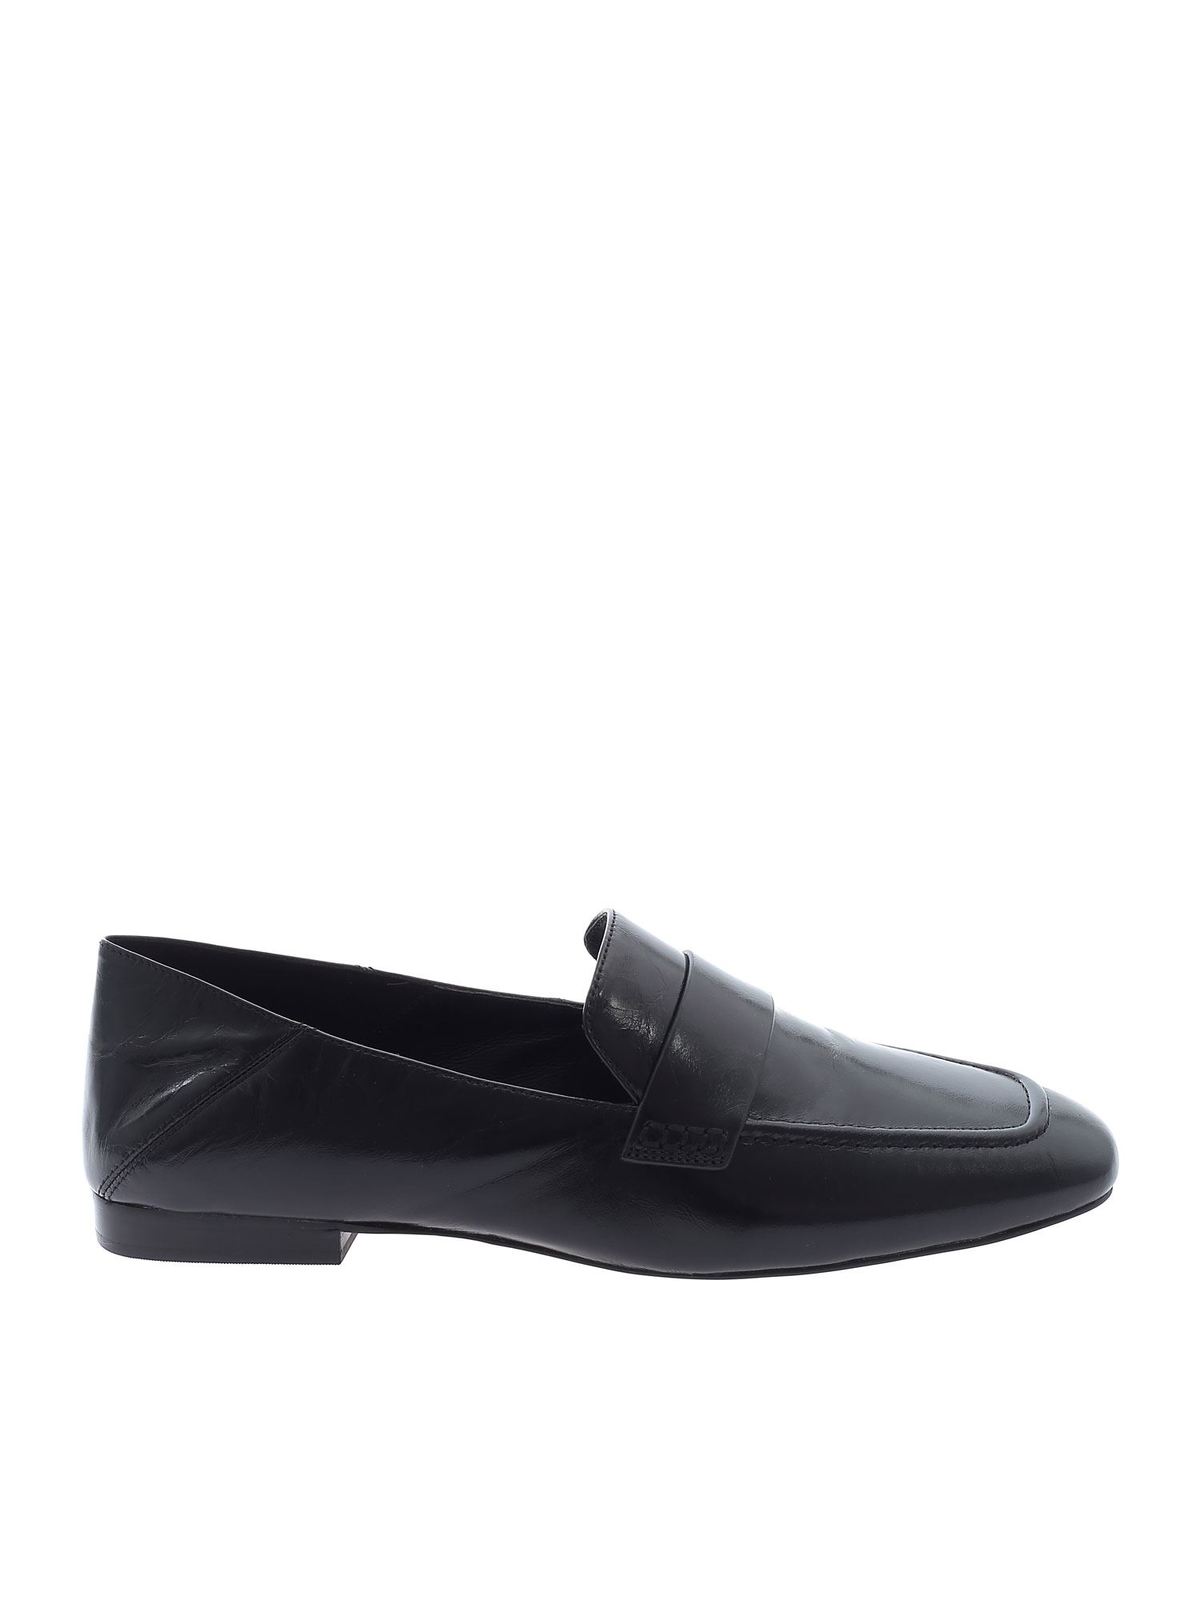 MICHAEL KORS EMORY LOAFERS IN BLACK CRINKLED LEATHER